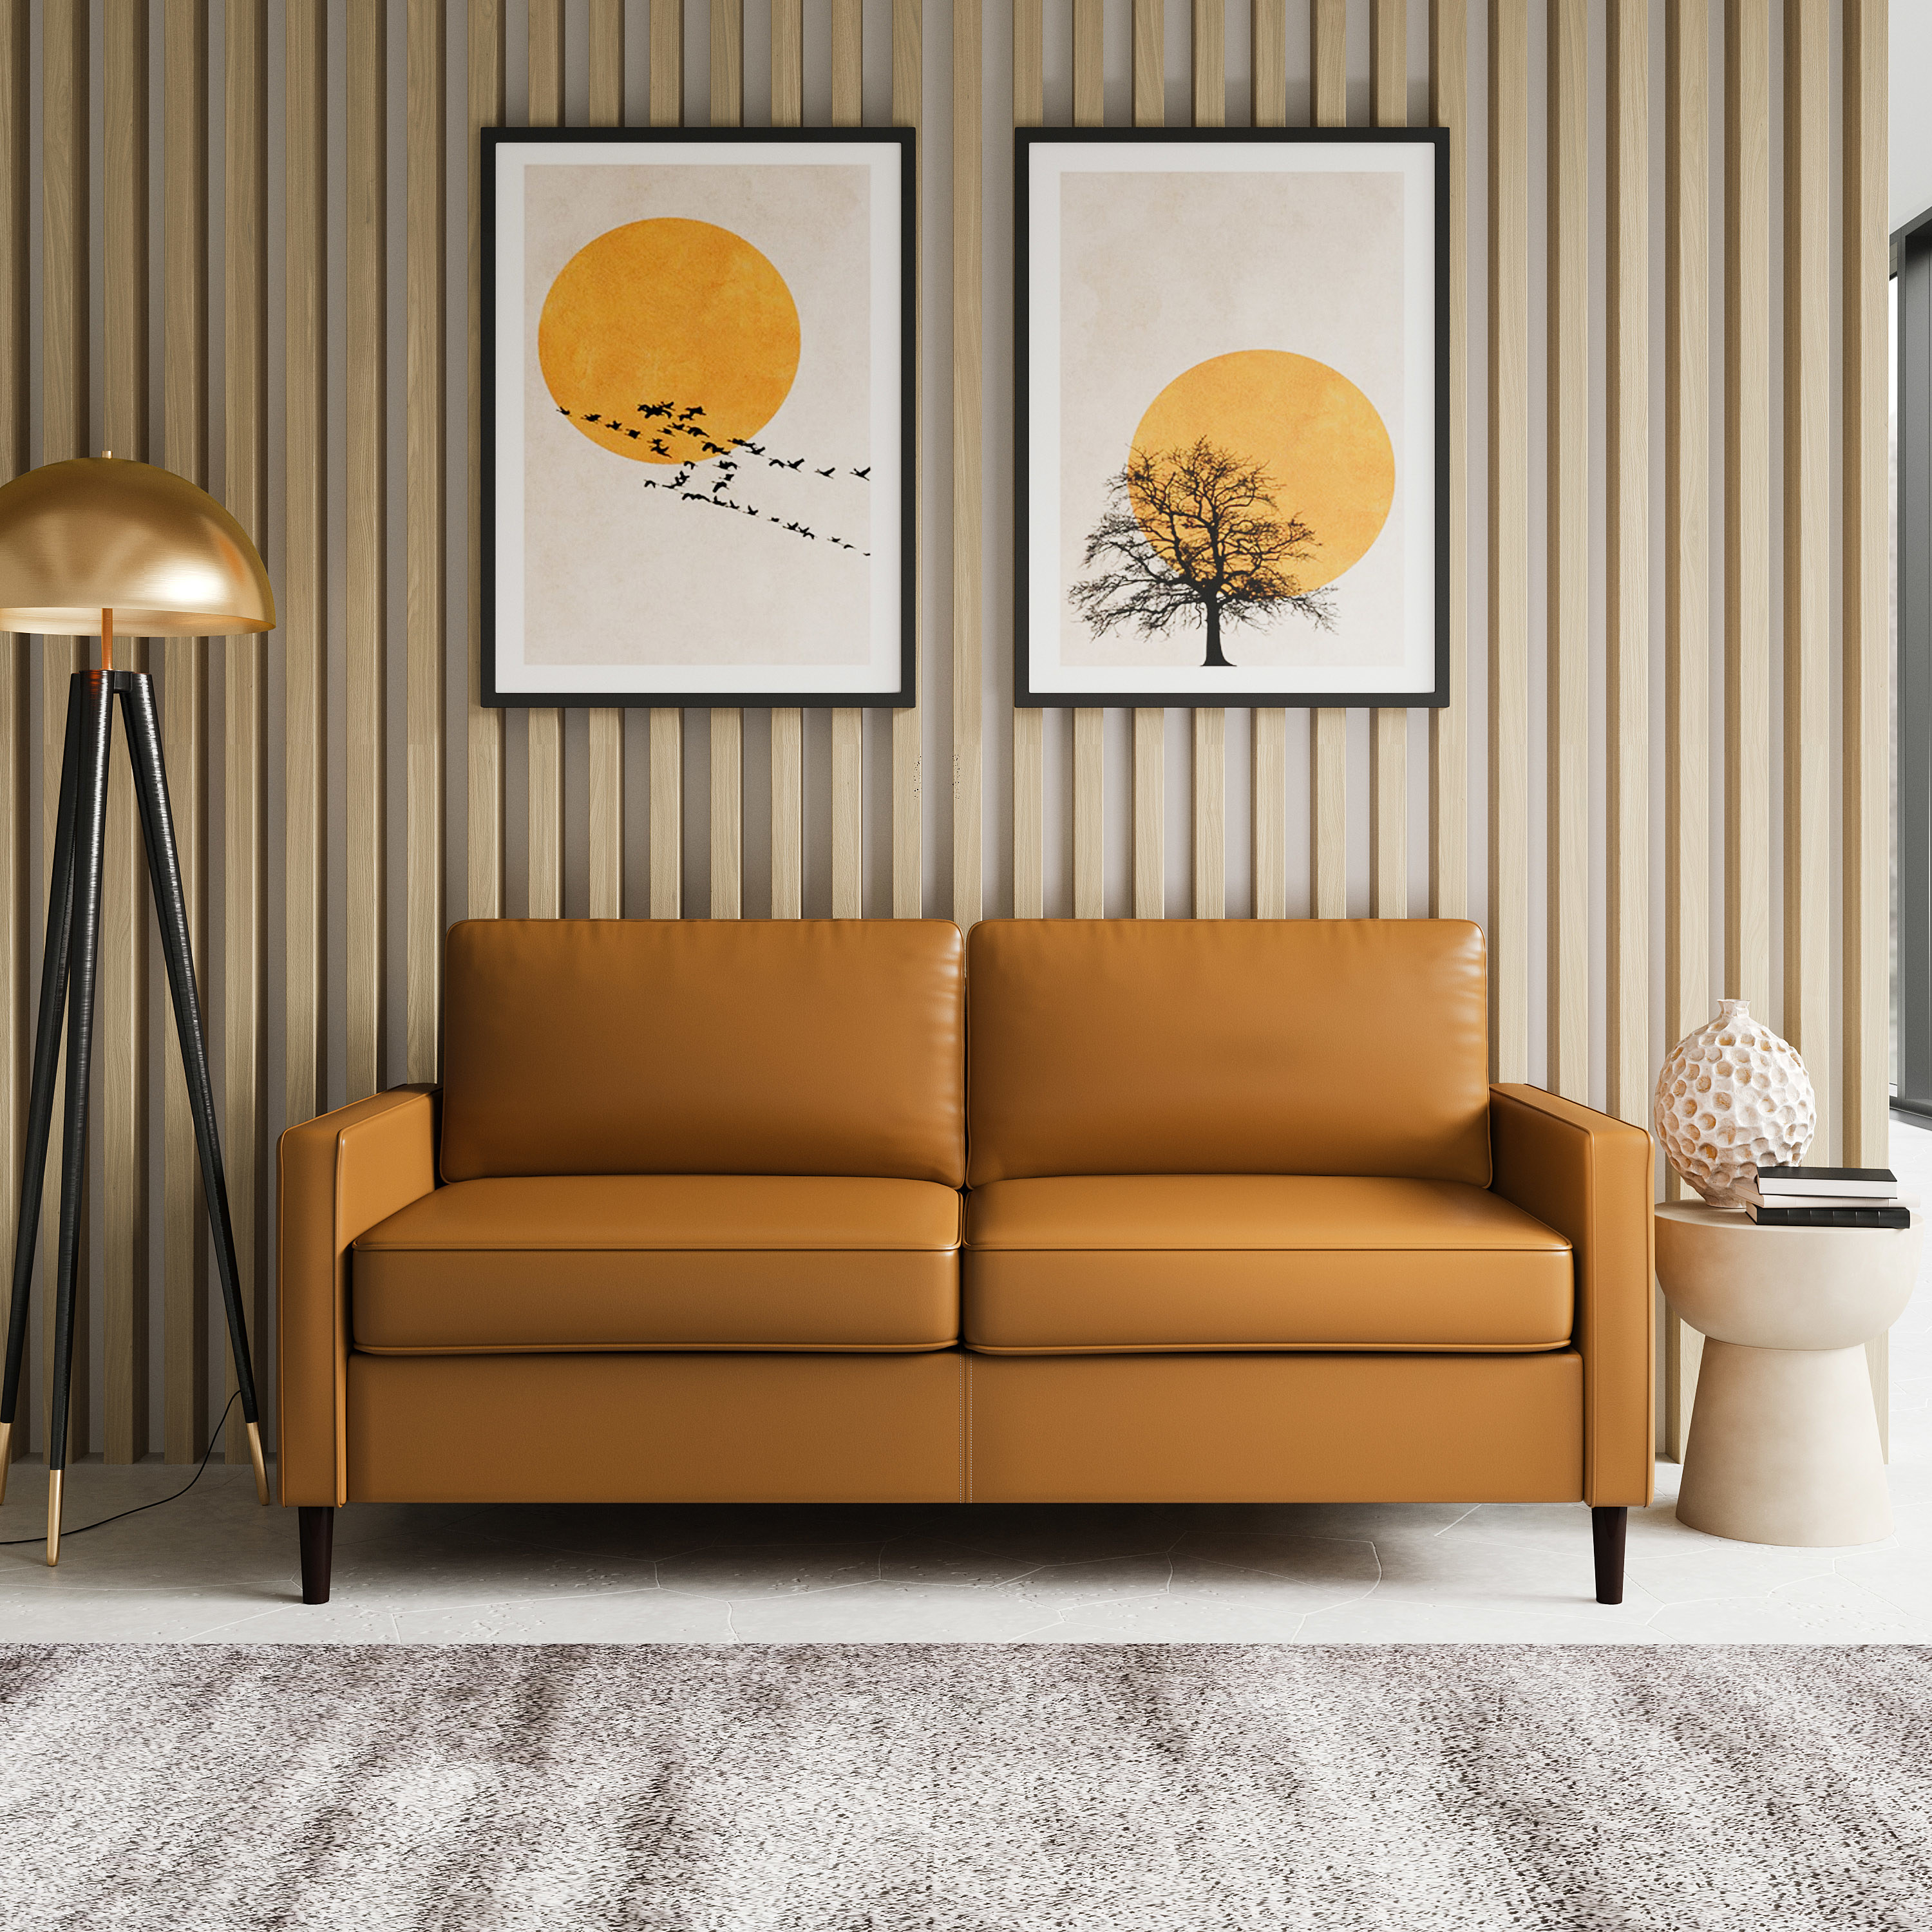 Camel sofa in living space